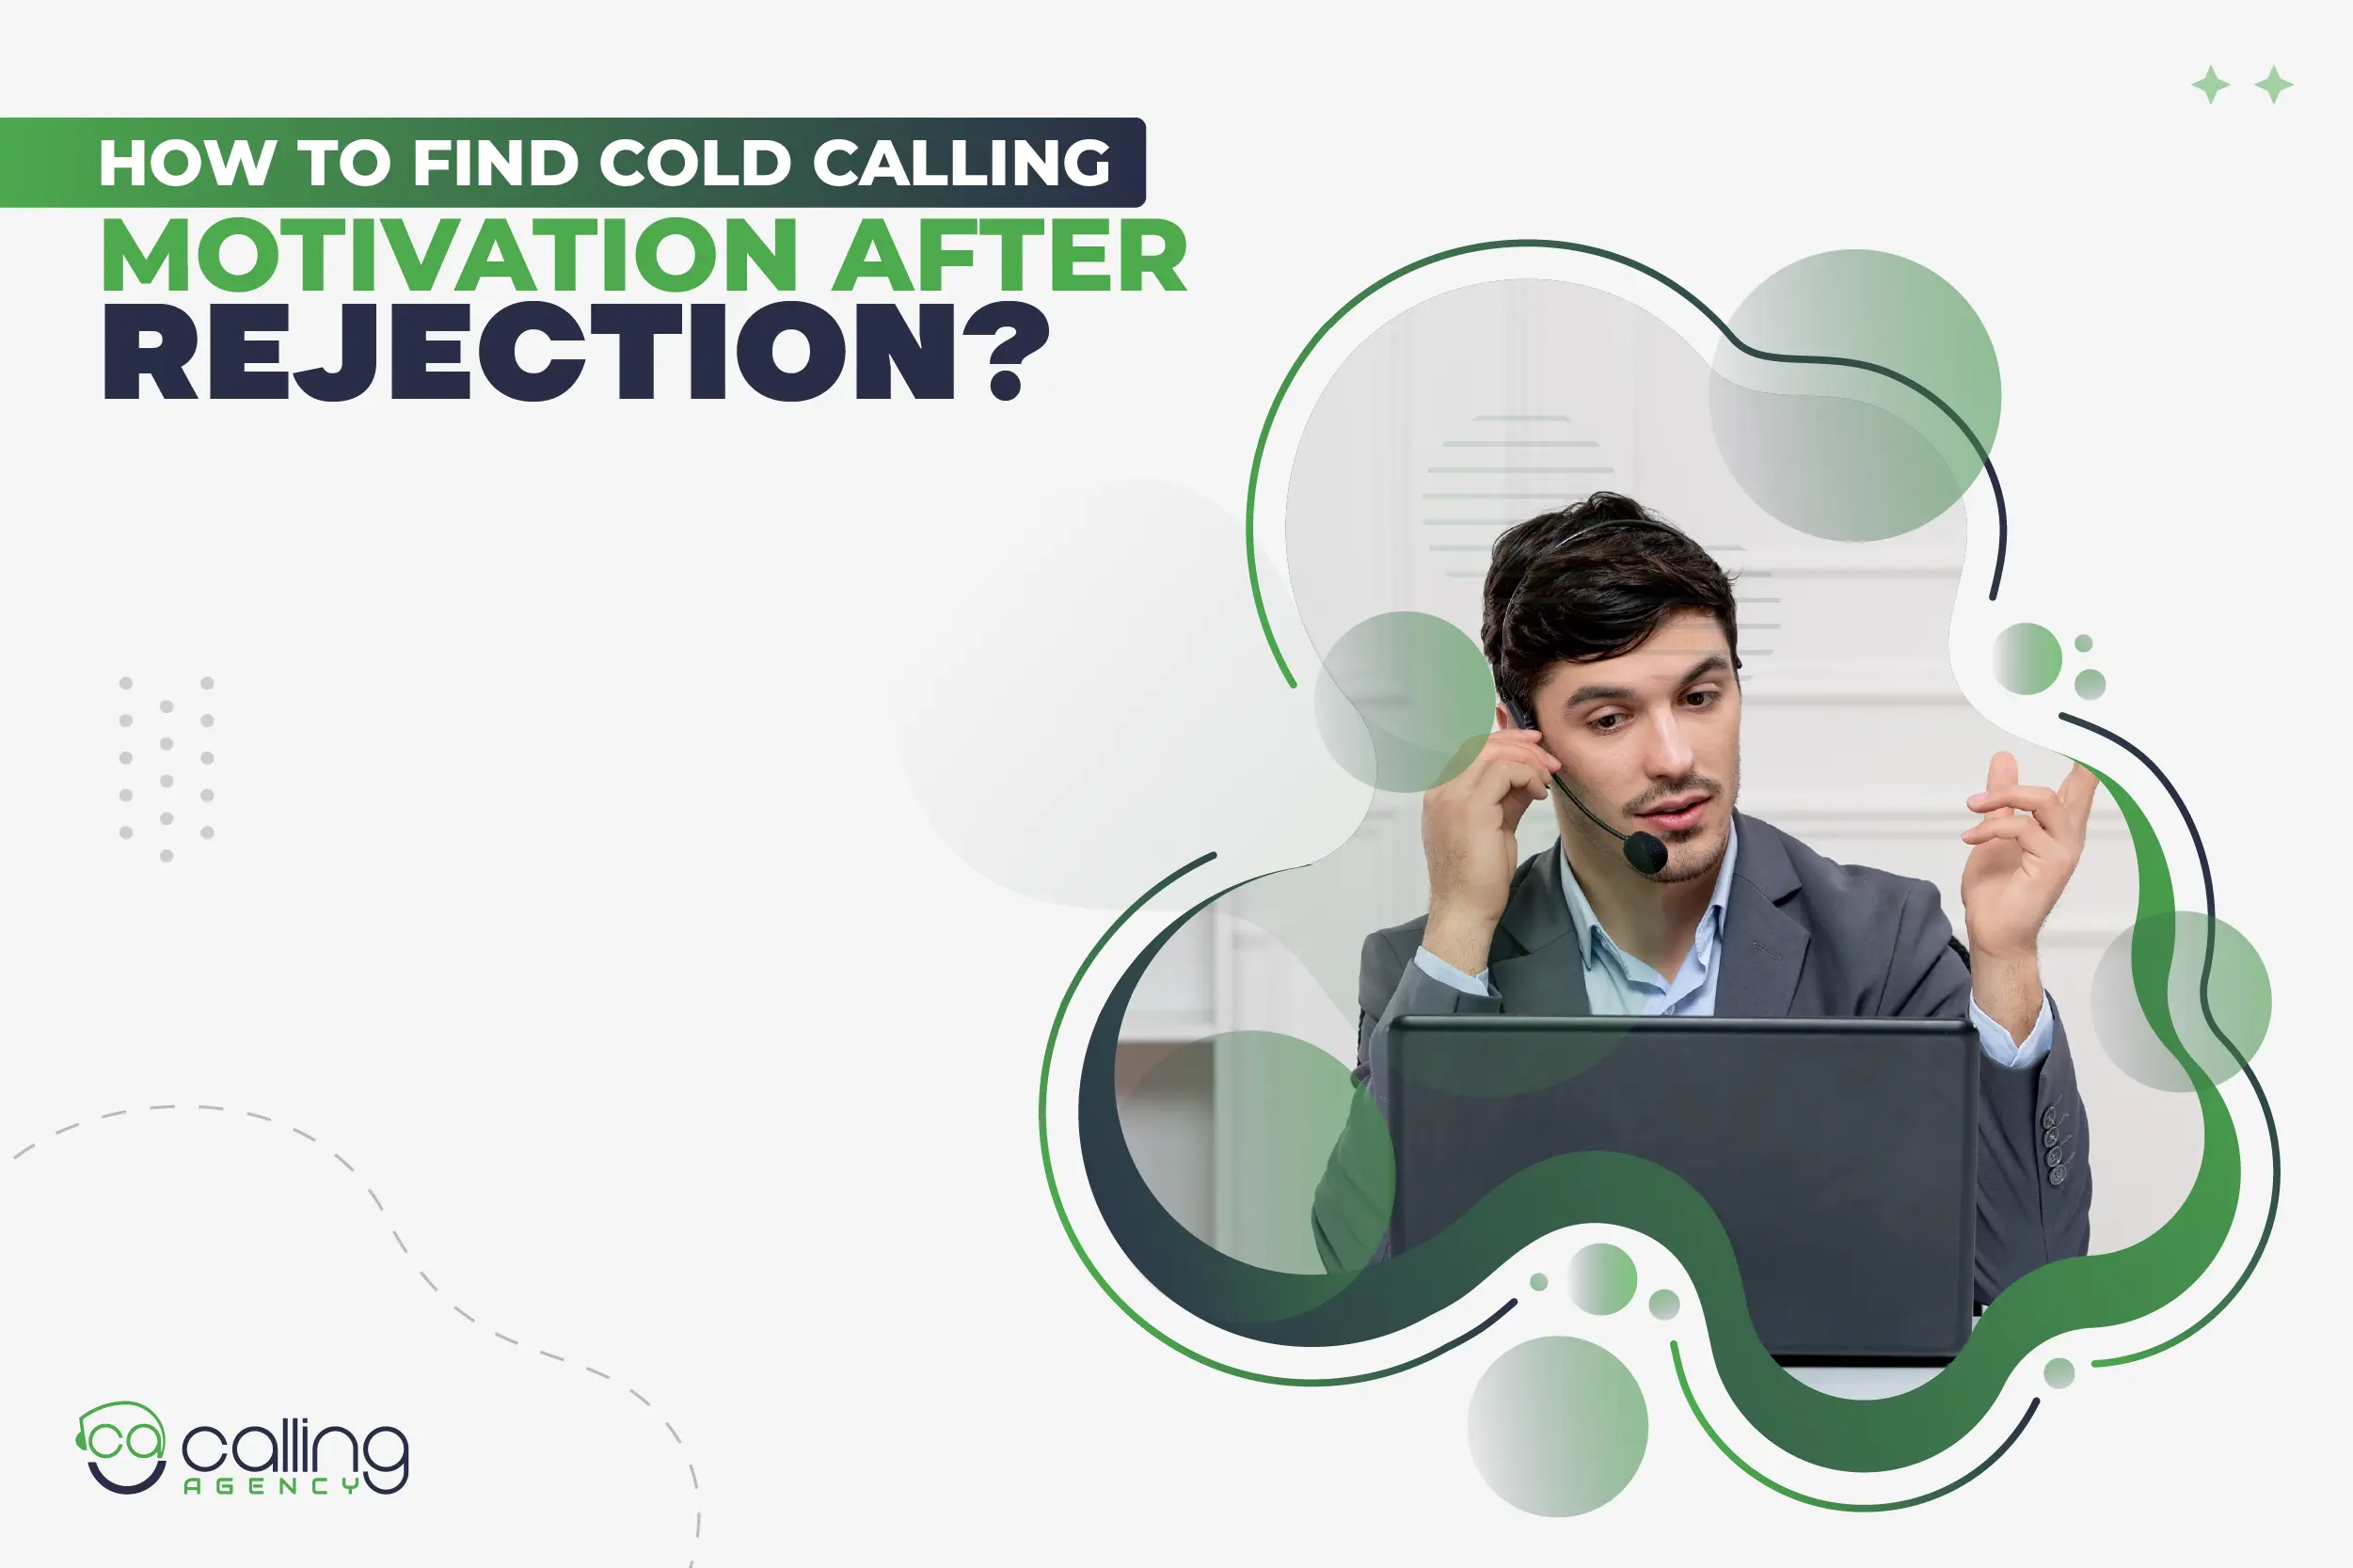 How to Find Cold Calling Motivation After Rejection